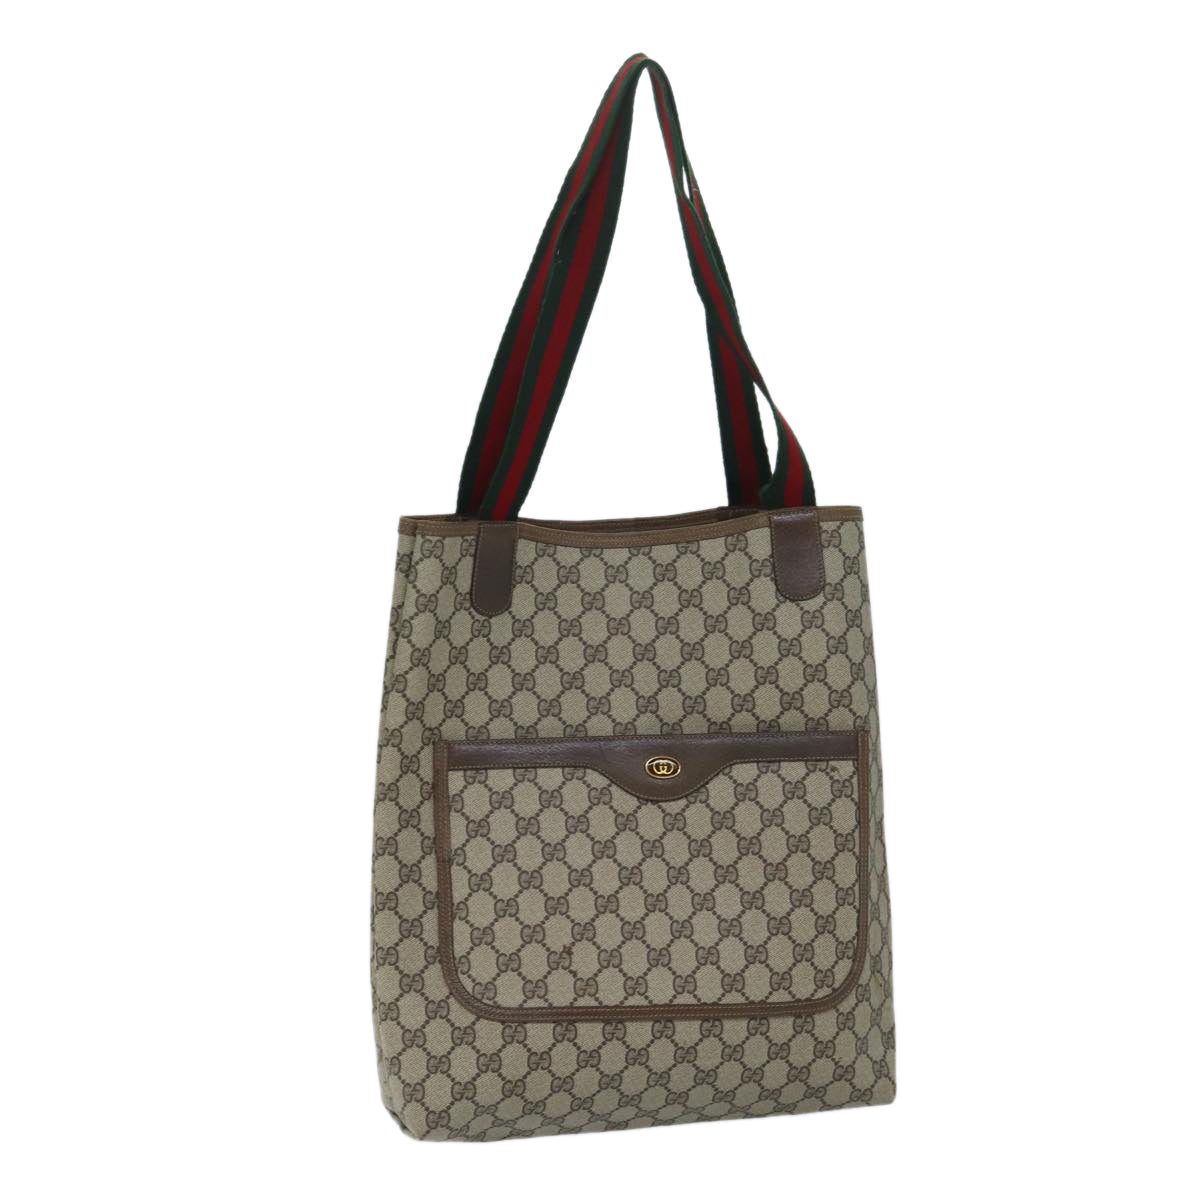 GUCCI GG Supreme Web Sherry Line Tote Bag Beige Red Green 39 02 003 Auth yk11426